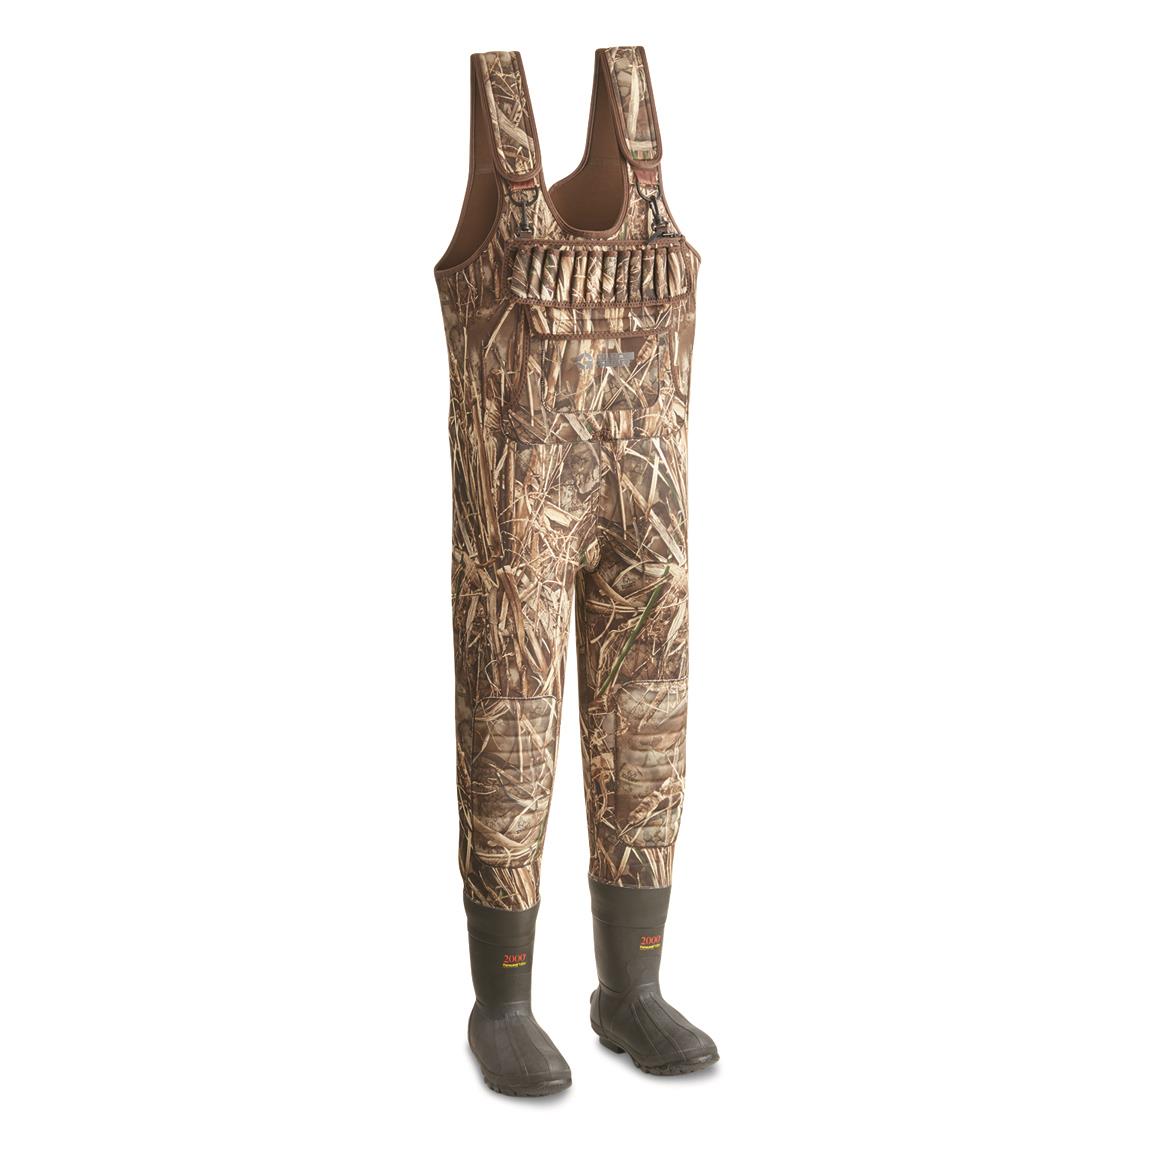 Guide Gear Men's Extreme Insulated Chest Waders, 2,000-gram, Realtree Max-7